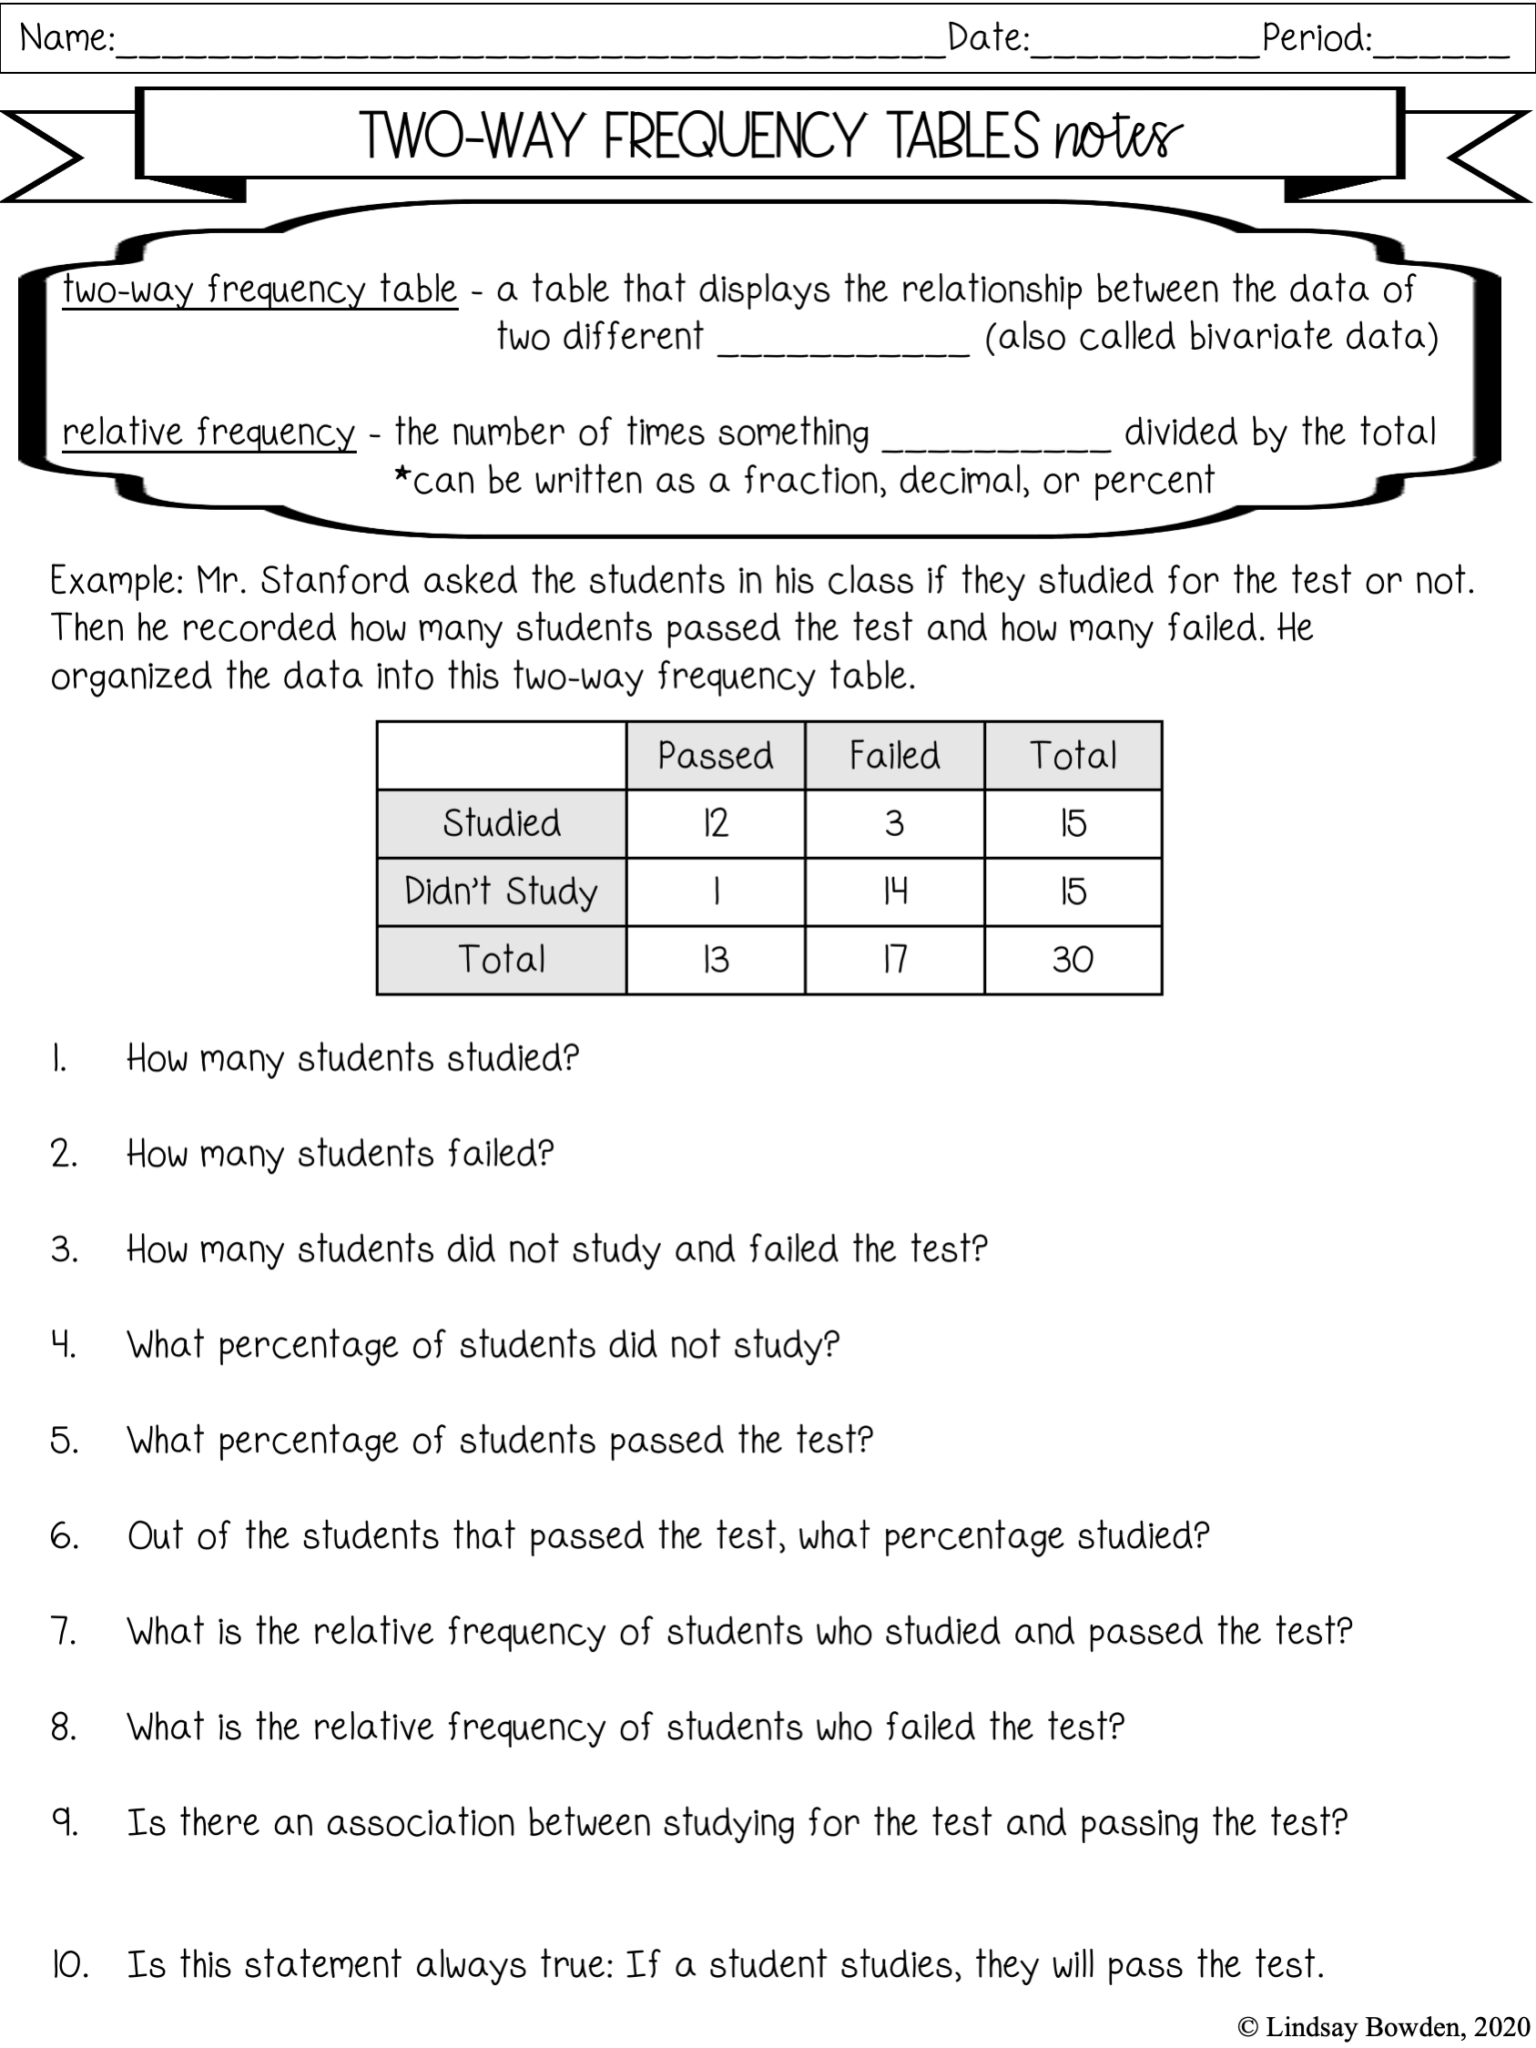 Two Way Frequency Tables Notes and Worksheets Lindsay Bowden